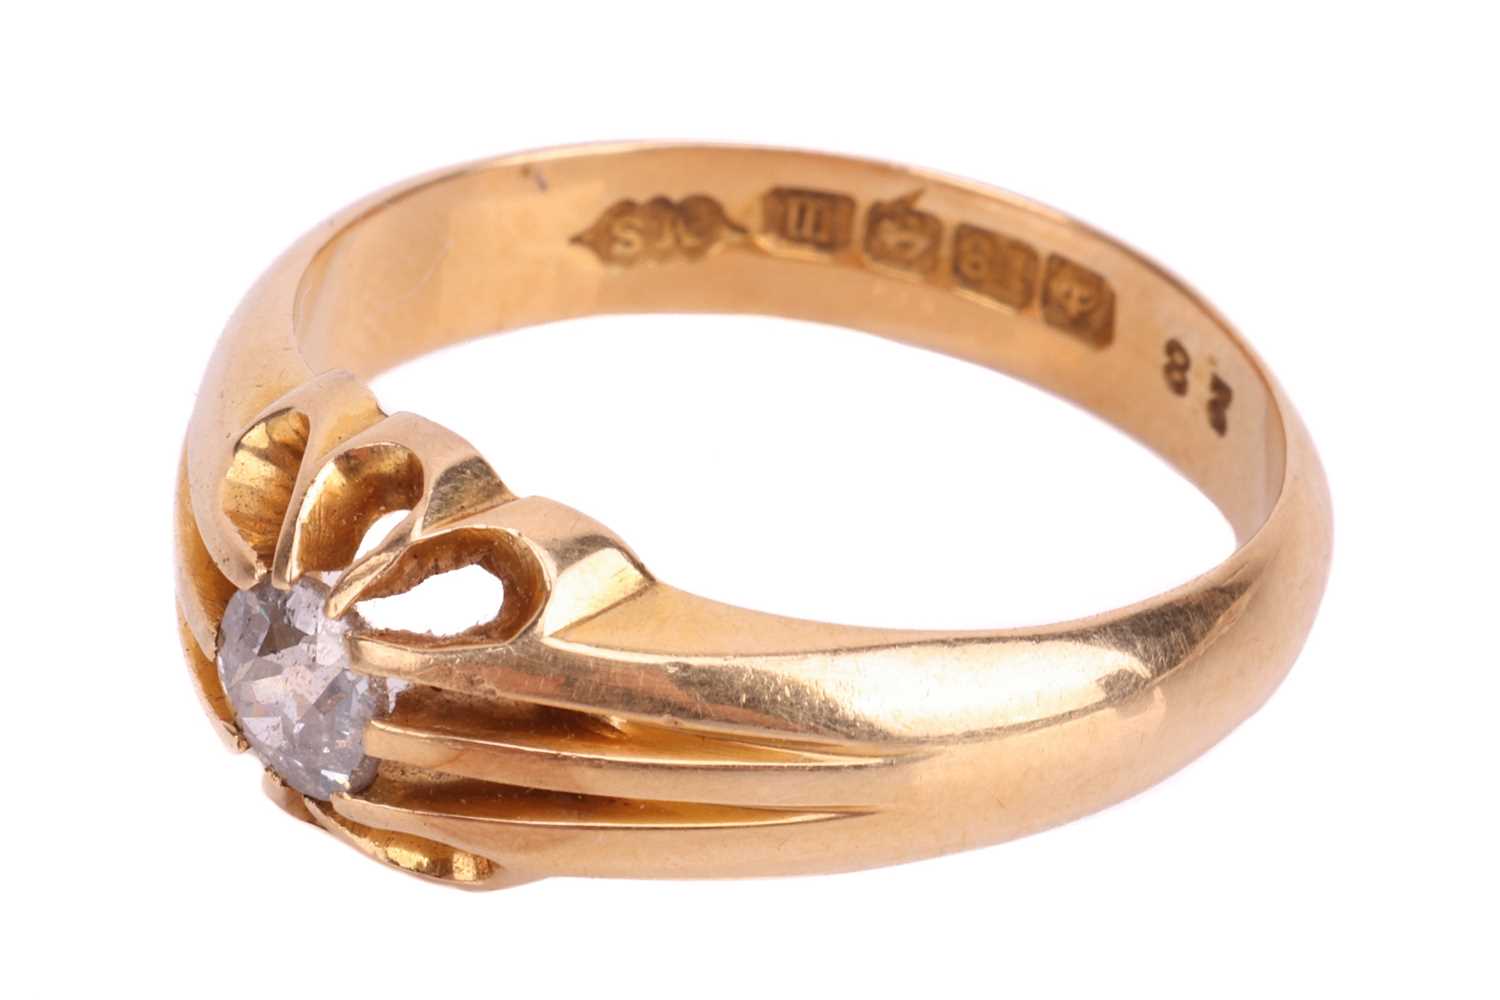 An Edwardian diamond belcher ring in 18ct gold, comprising an old-cut diamond of 4.2 x 4.0 x 2.4 mm, - Image 3 of 4